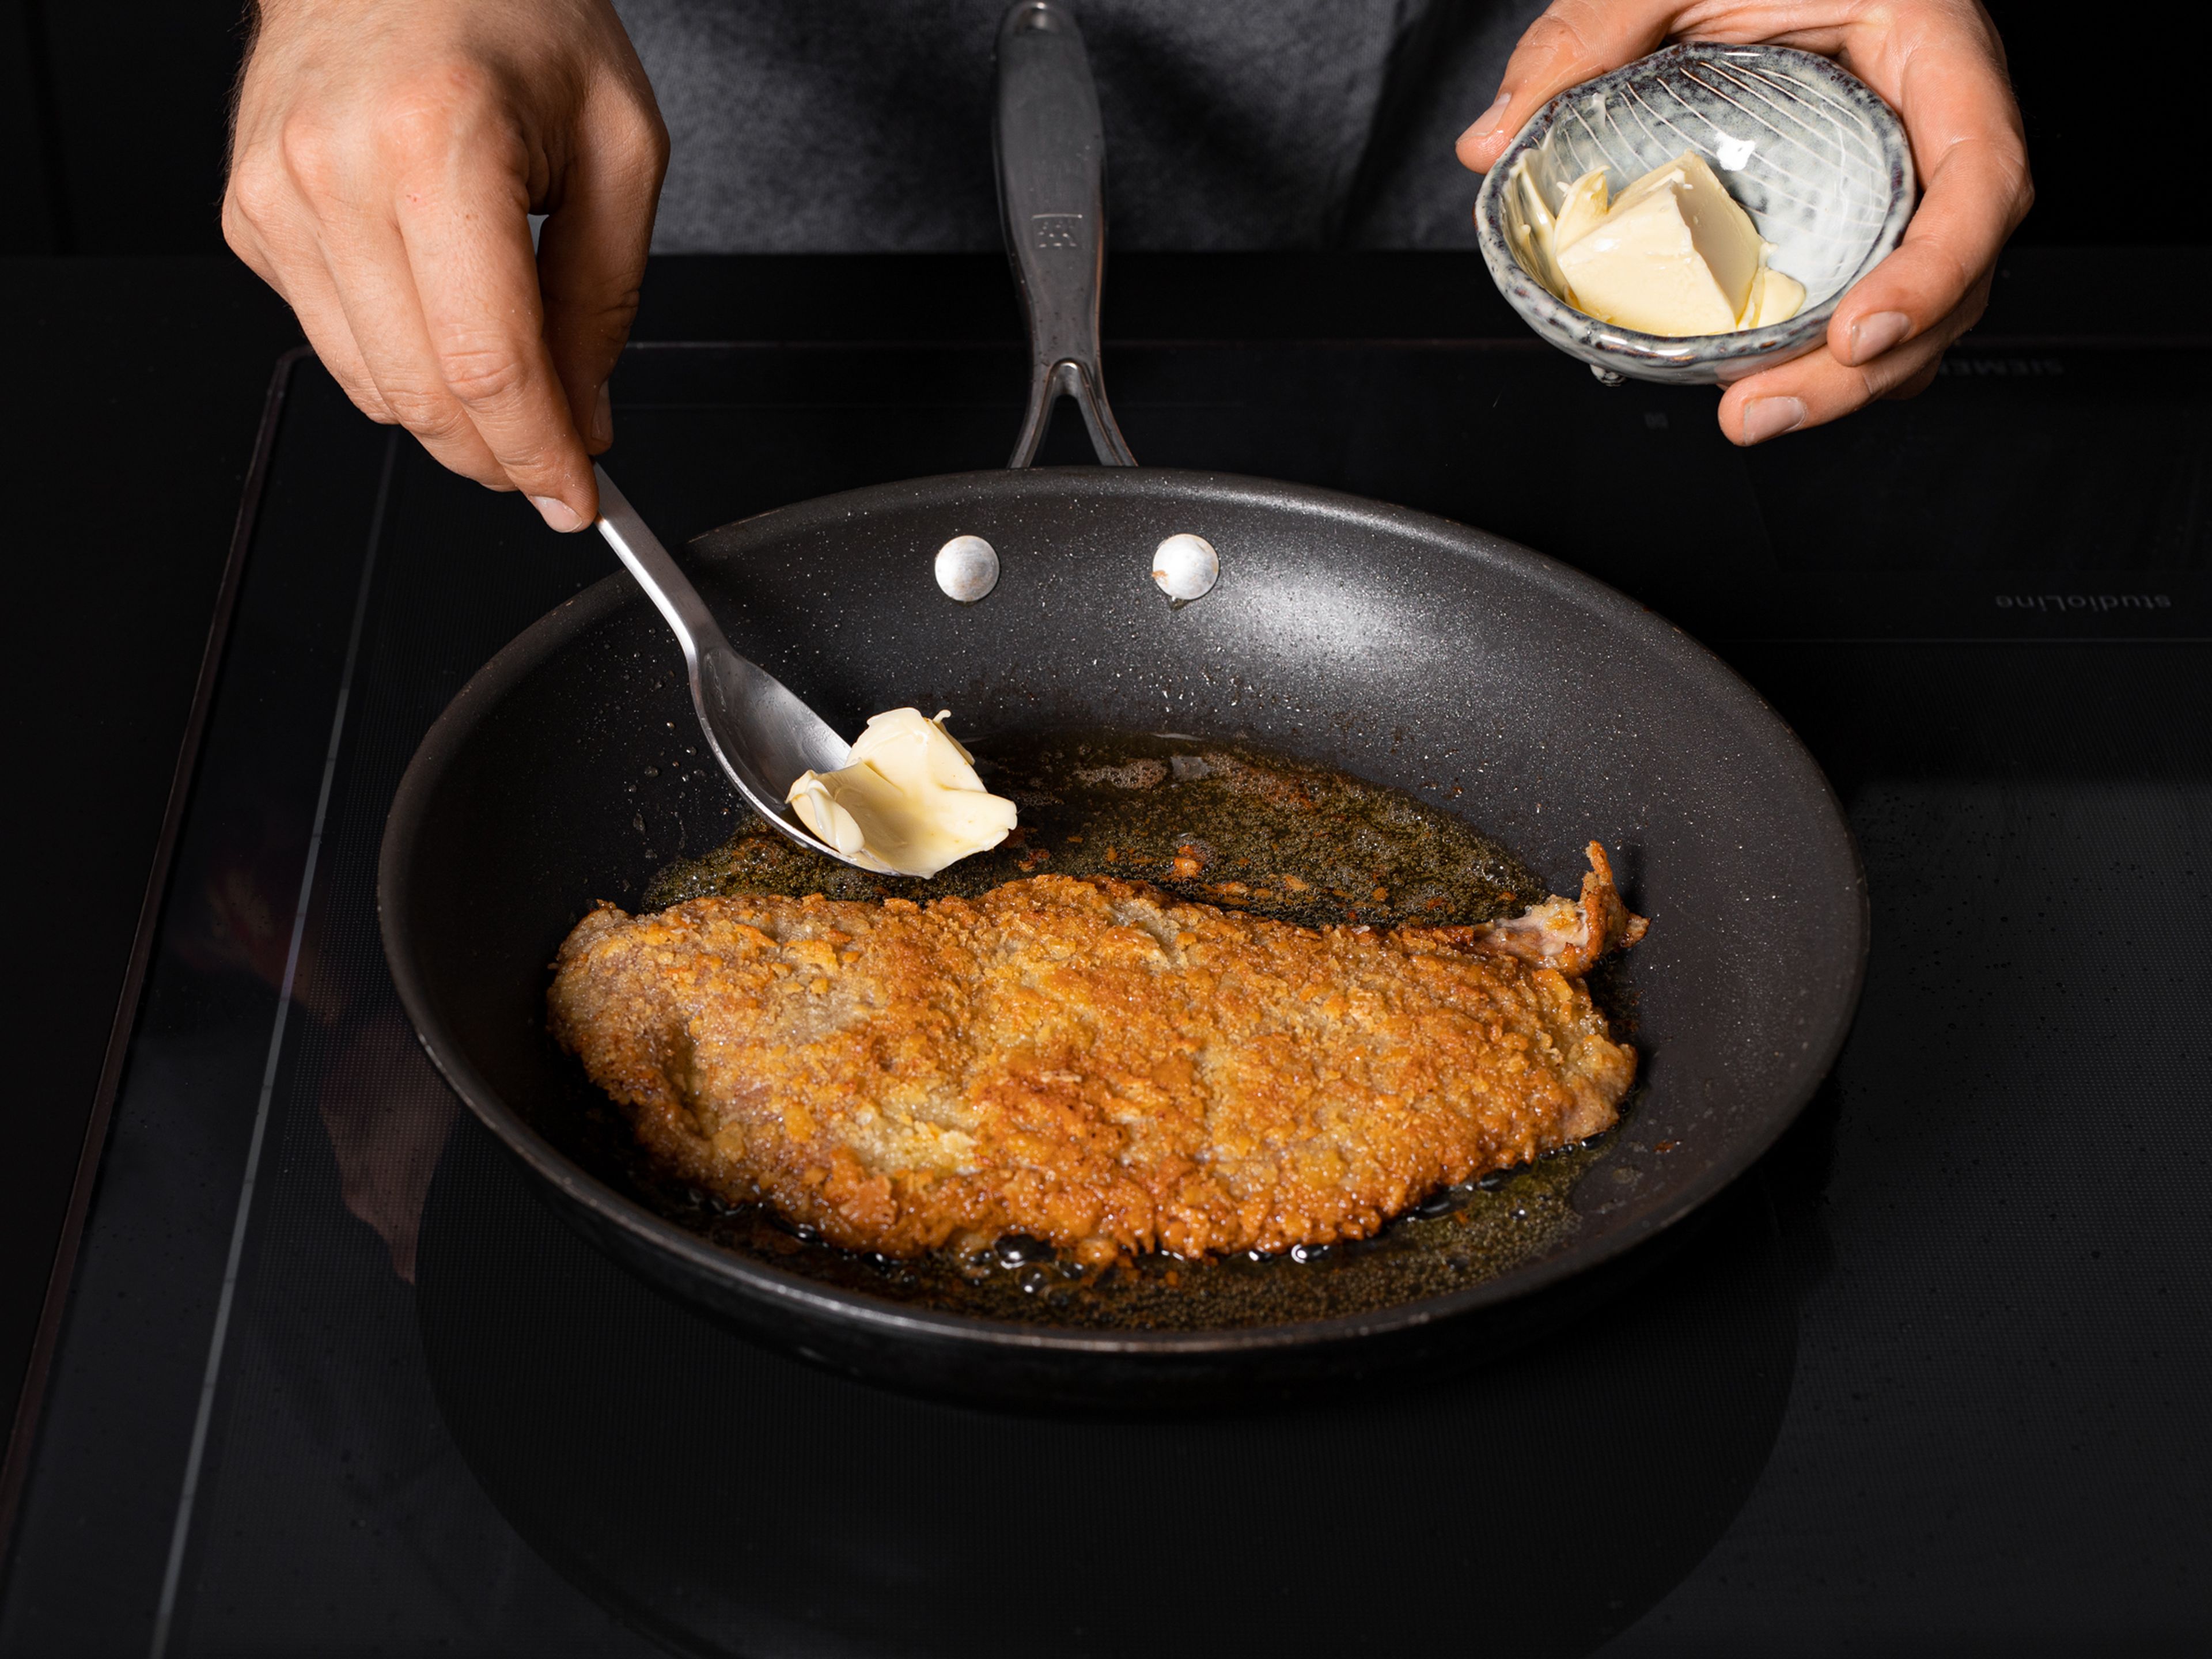 Add clarified butter to a frying pan over medium heat and fry each cutlet on both sides for approx. 2 – 3 min., or until golden brown and cooked through. Serve schnitzel with mushroom gravy, chopped parsley, and lemon wedges. Enjoy!